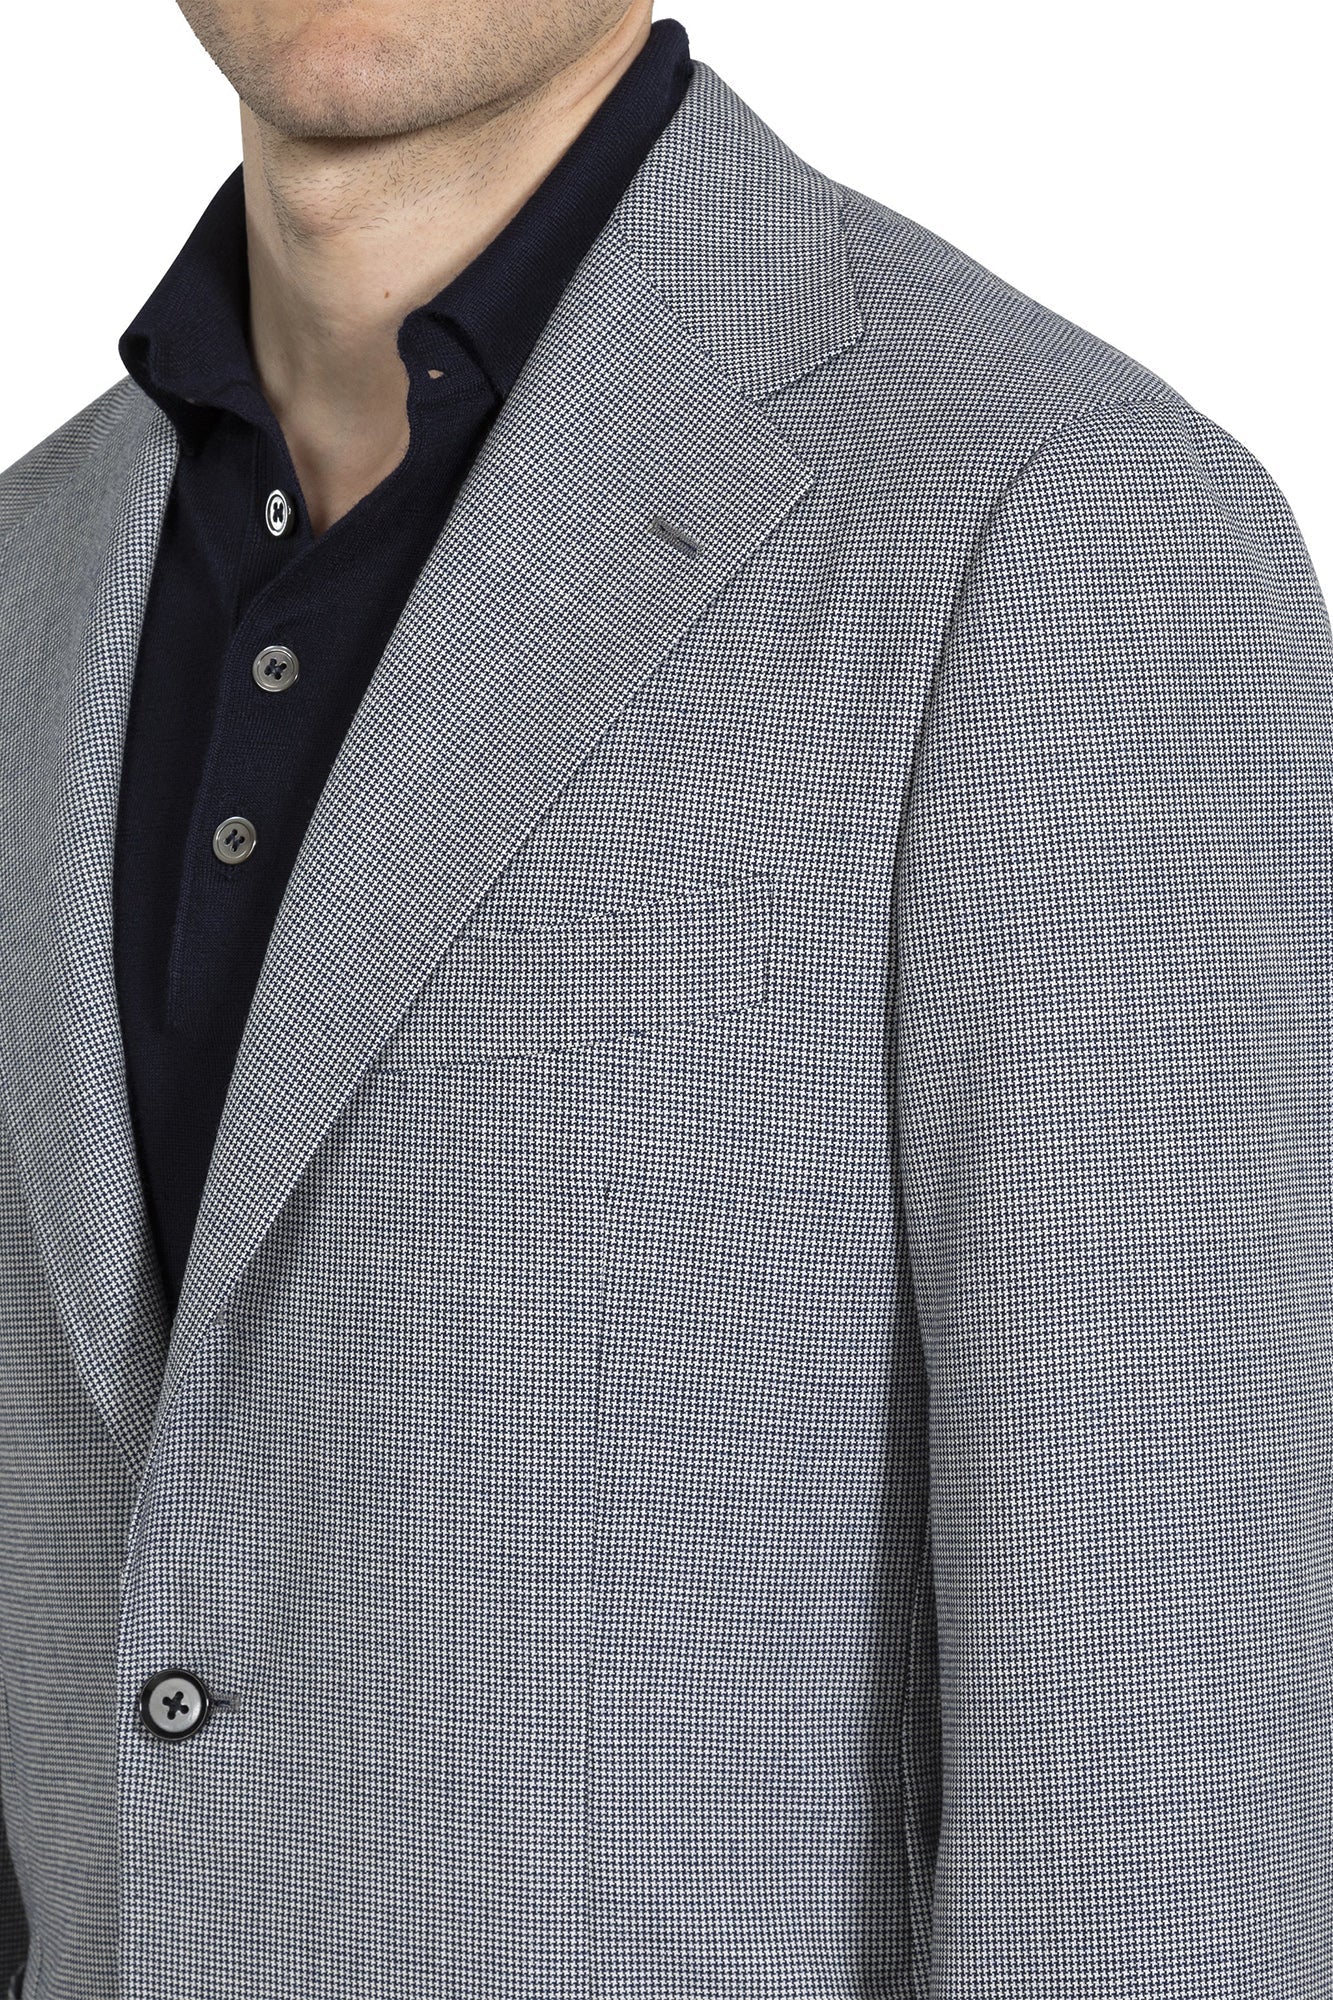 The Armoury by Ring Jacket Model 3 Navy/White Wool Puppytooth Sport Coat